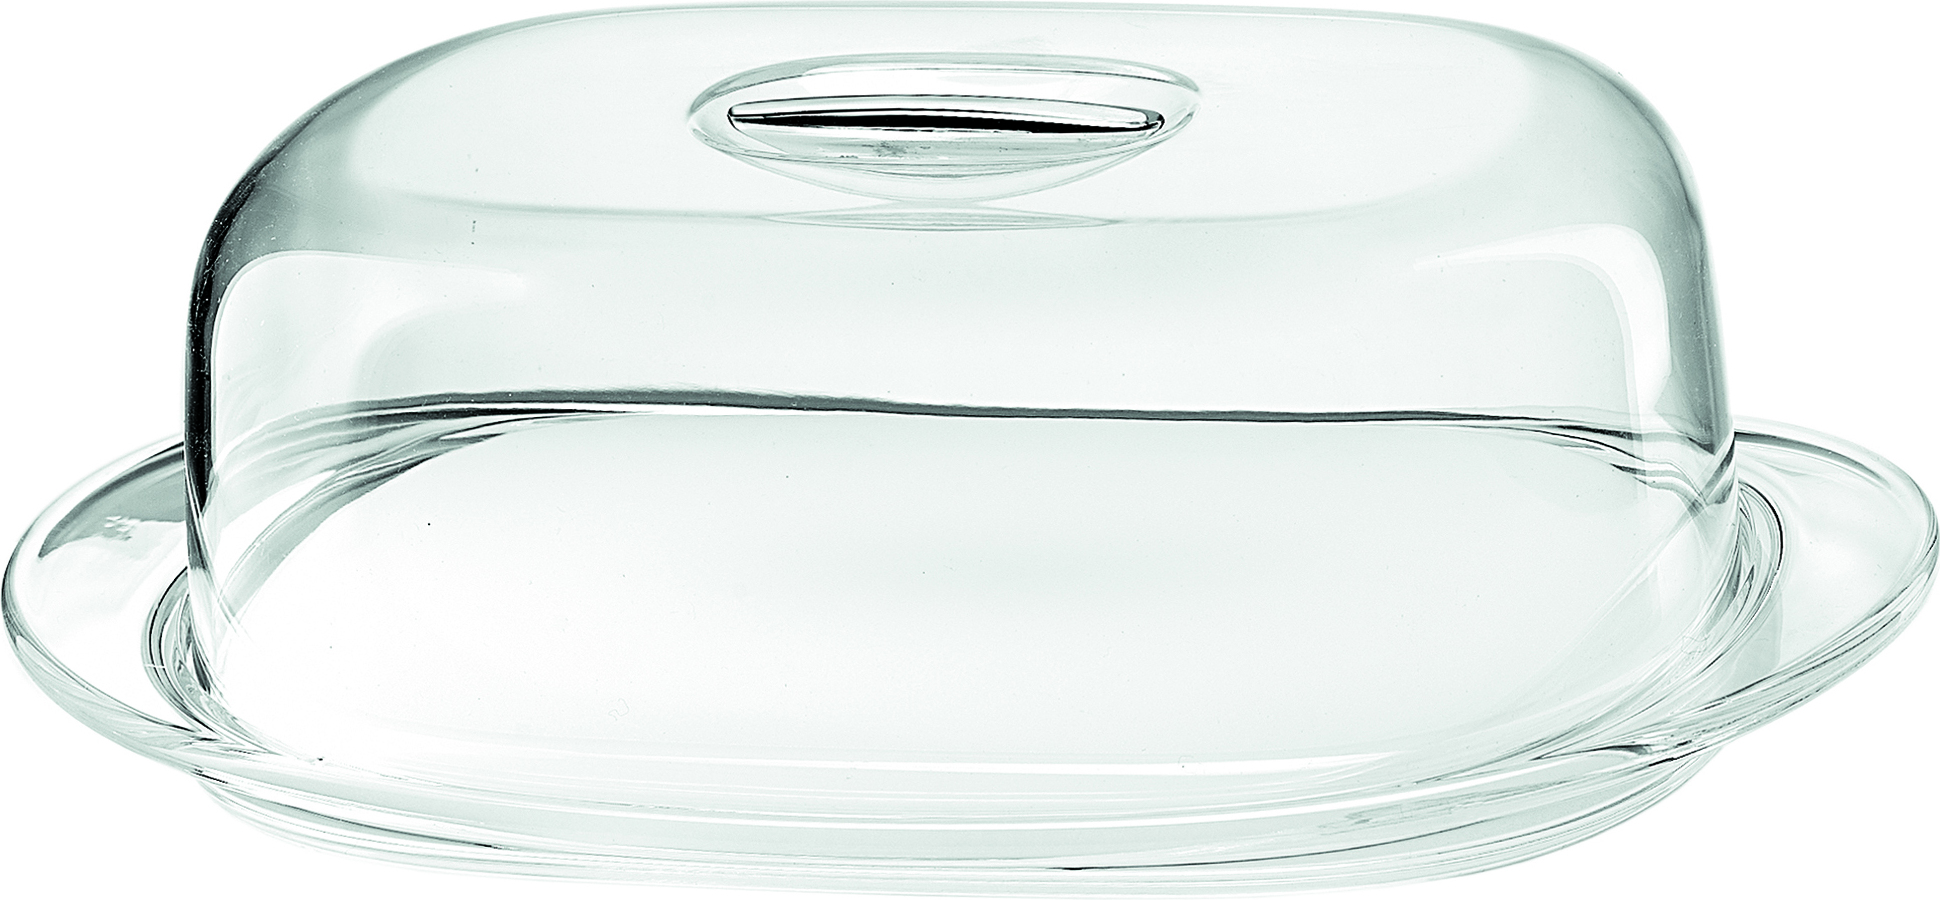 Look Cheese container - Guzzini 11300016